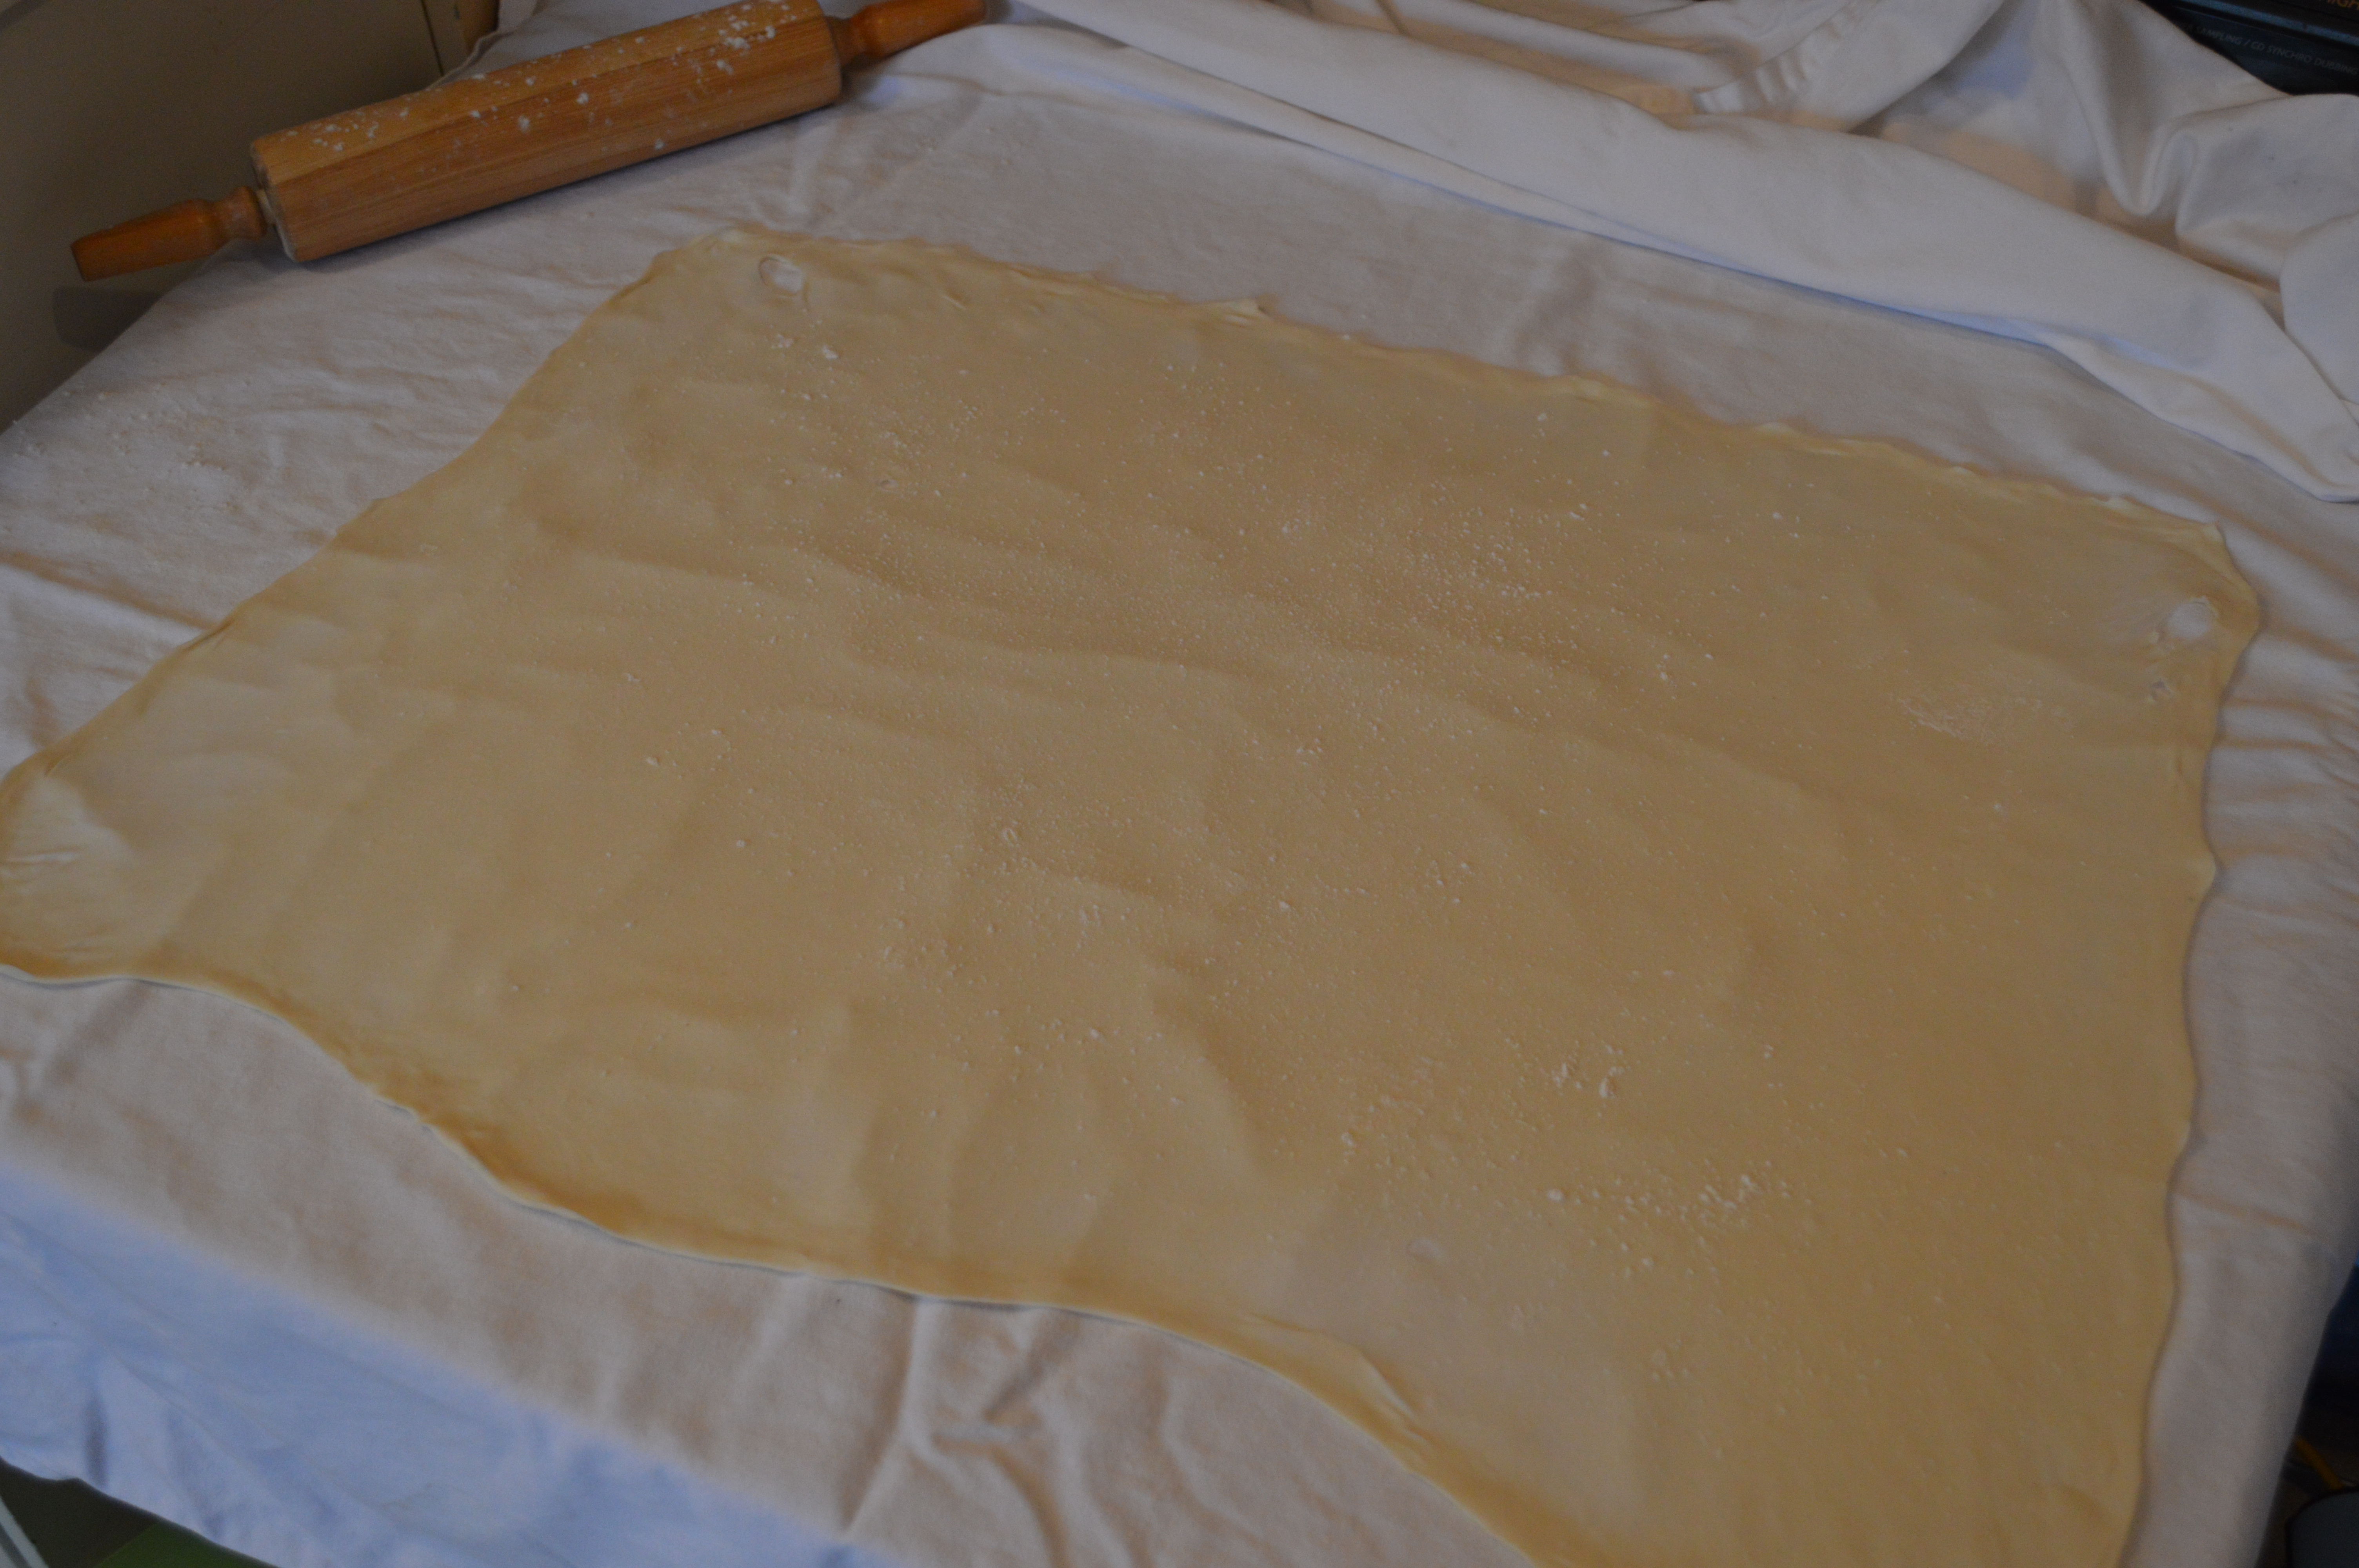 The fully stretched strudel dough